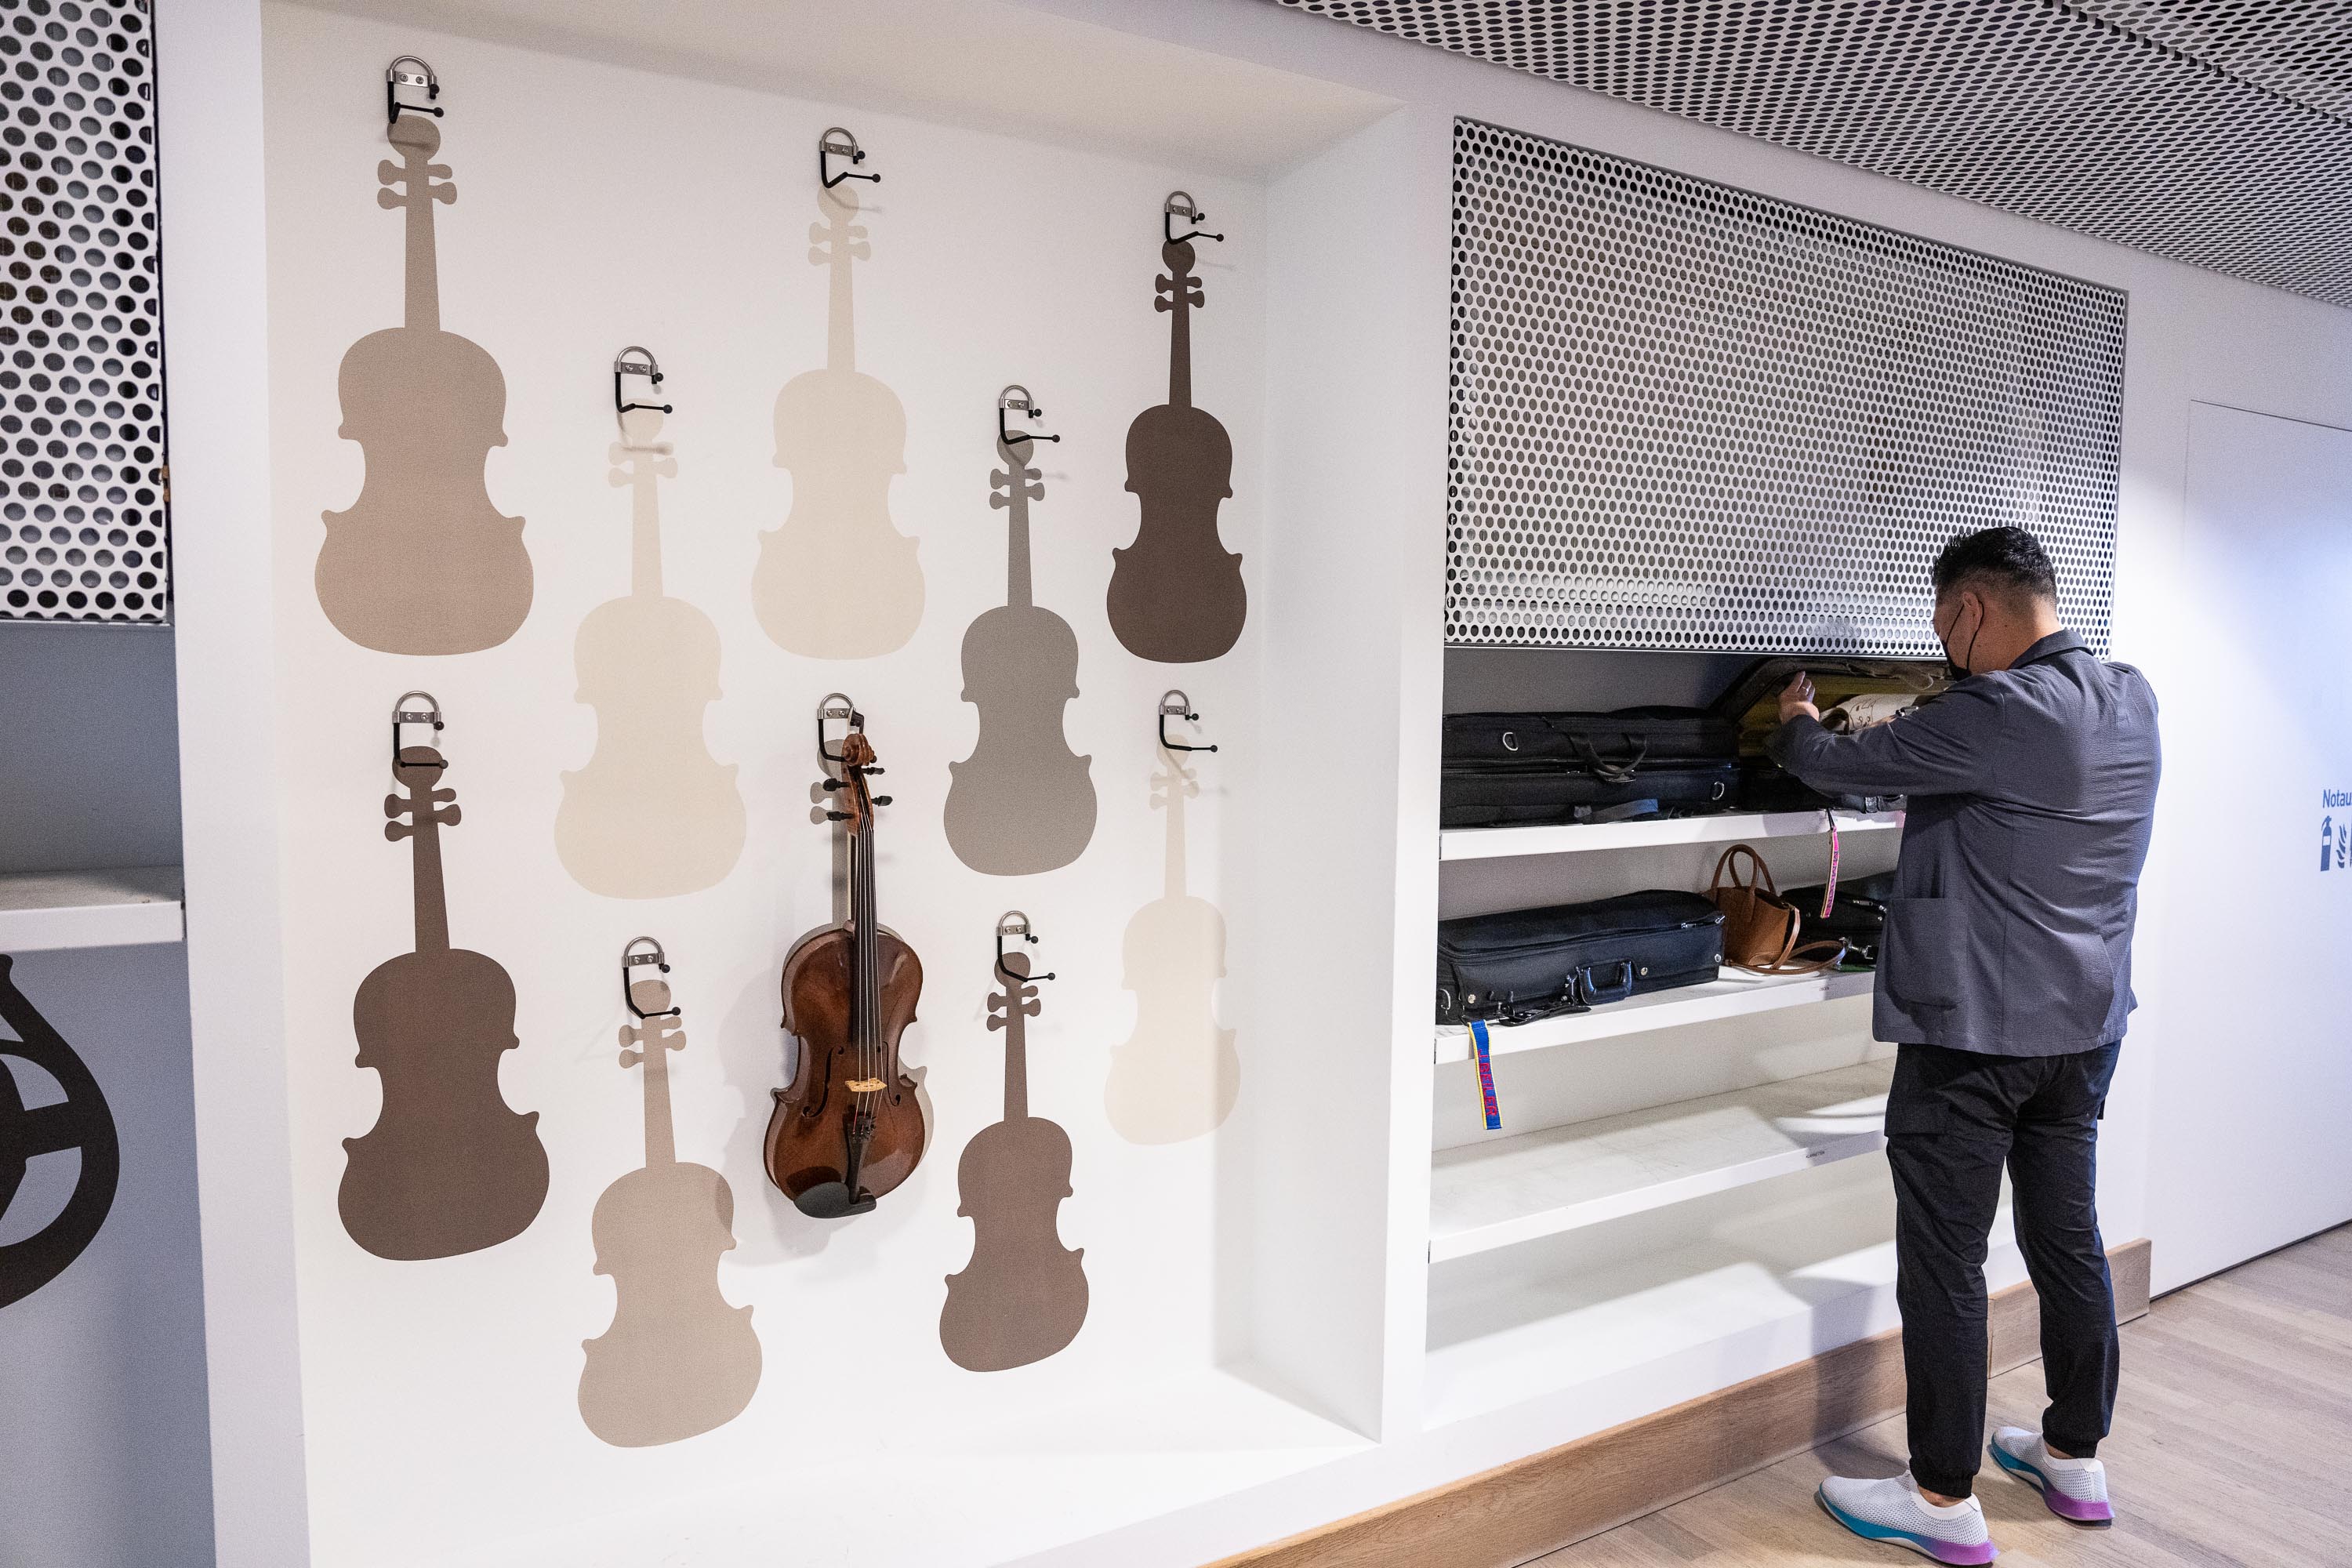 Violist Marvin Moon grabs something from his instrument case backstage at the Elbphilharmonie Hamburg